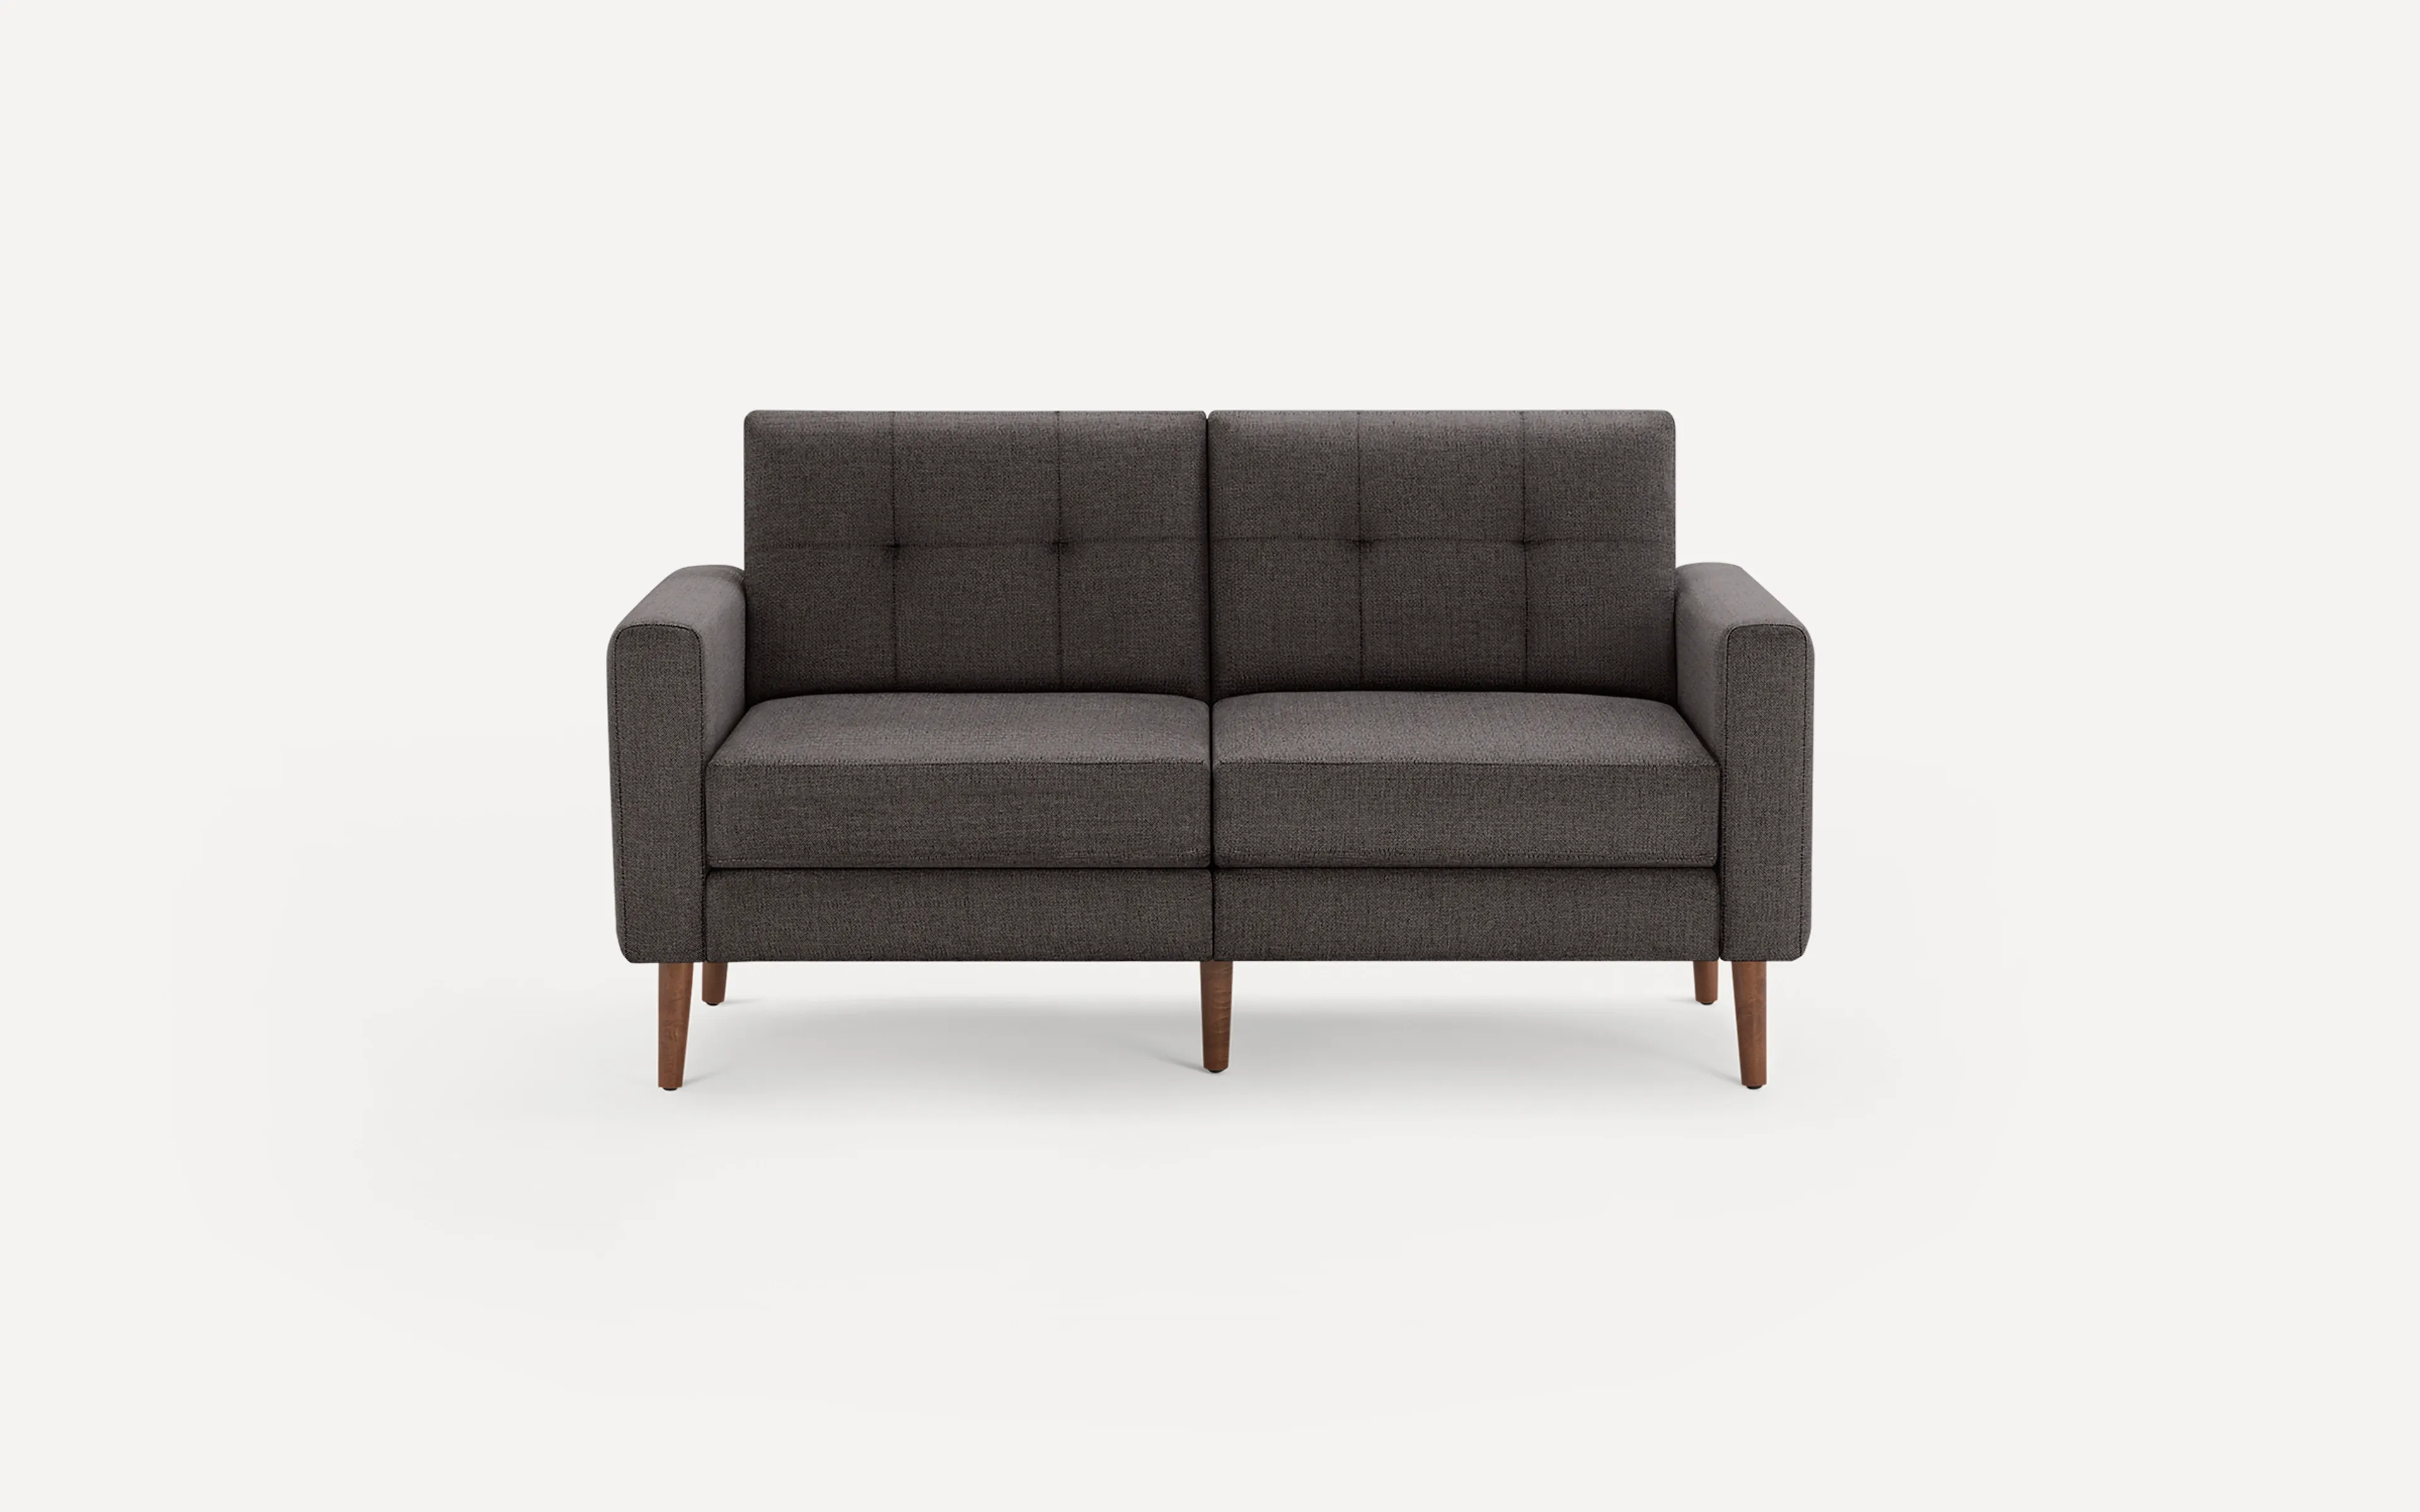 Original Nomad Loveseat in Charcoal Fabric